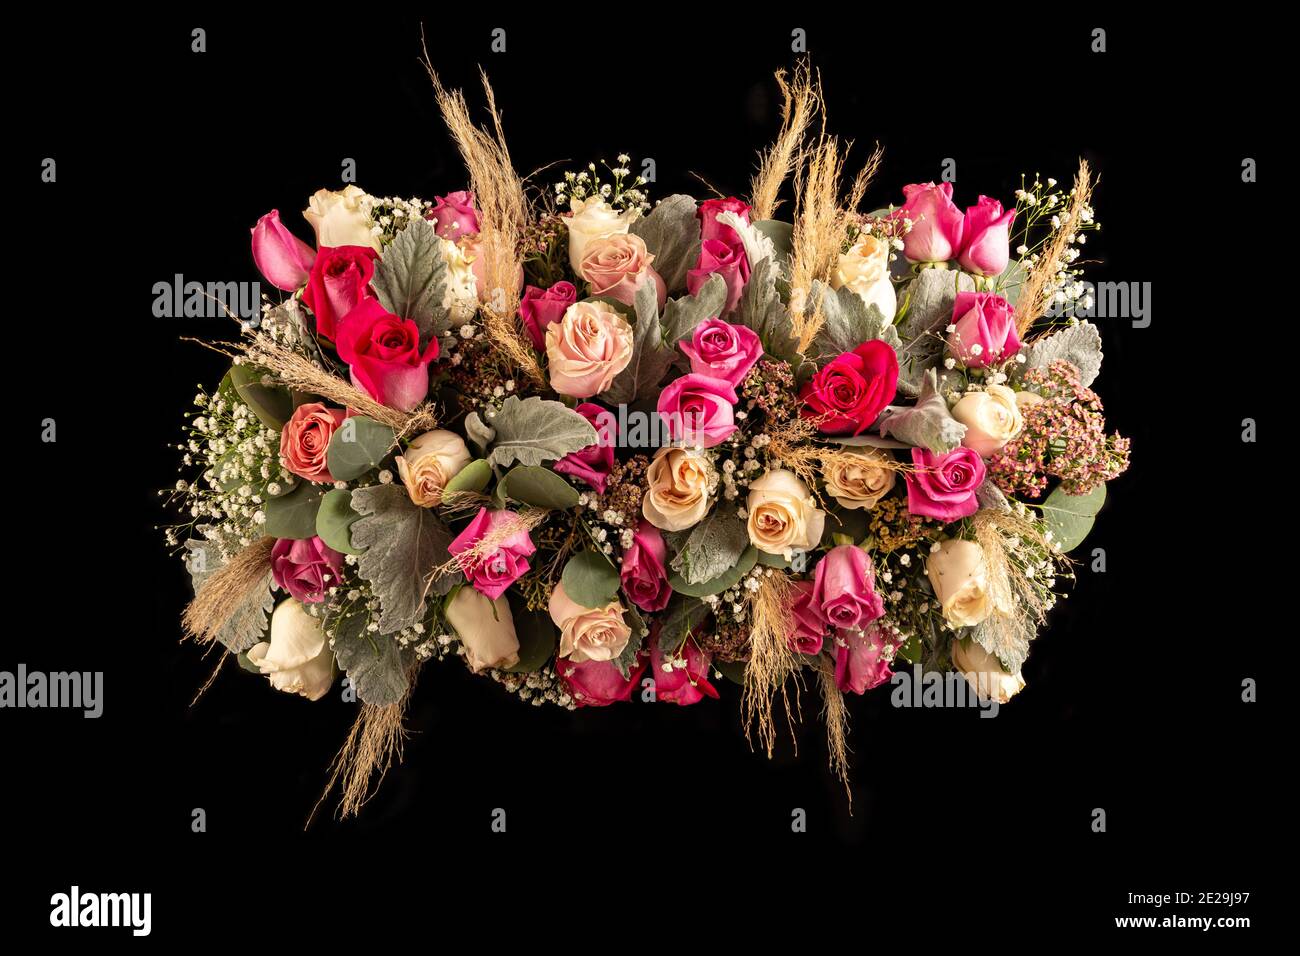 arrangement flower table centerpiece with pink tones roses and foliage. Isolated on black background Stock Photo